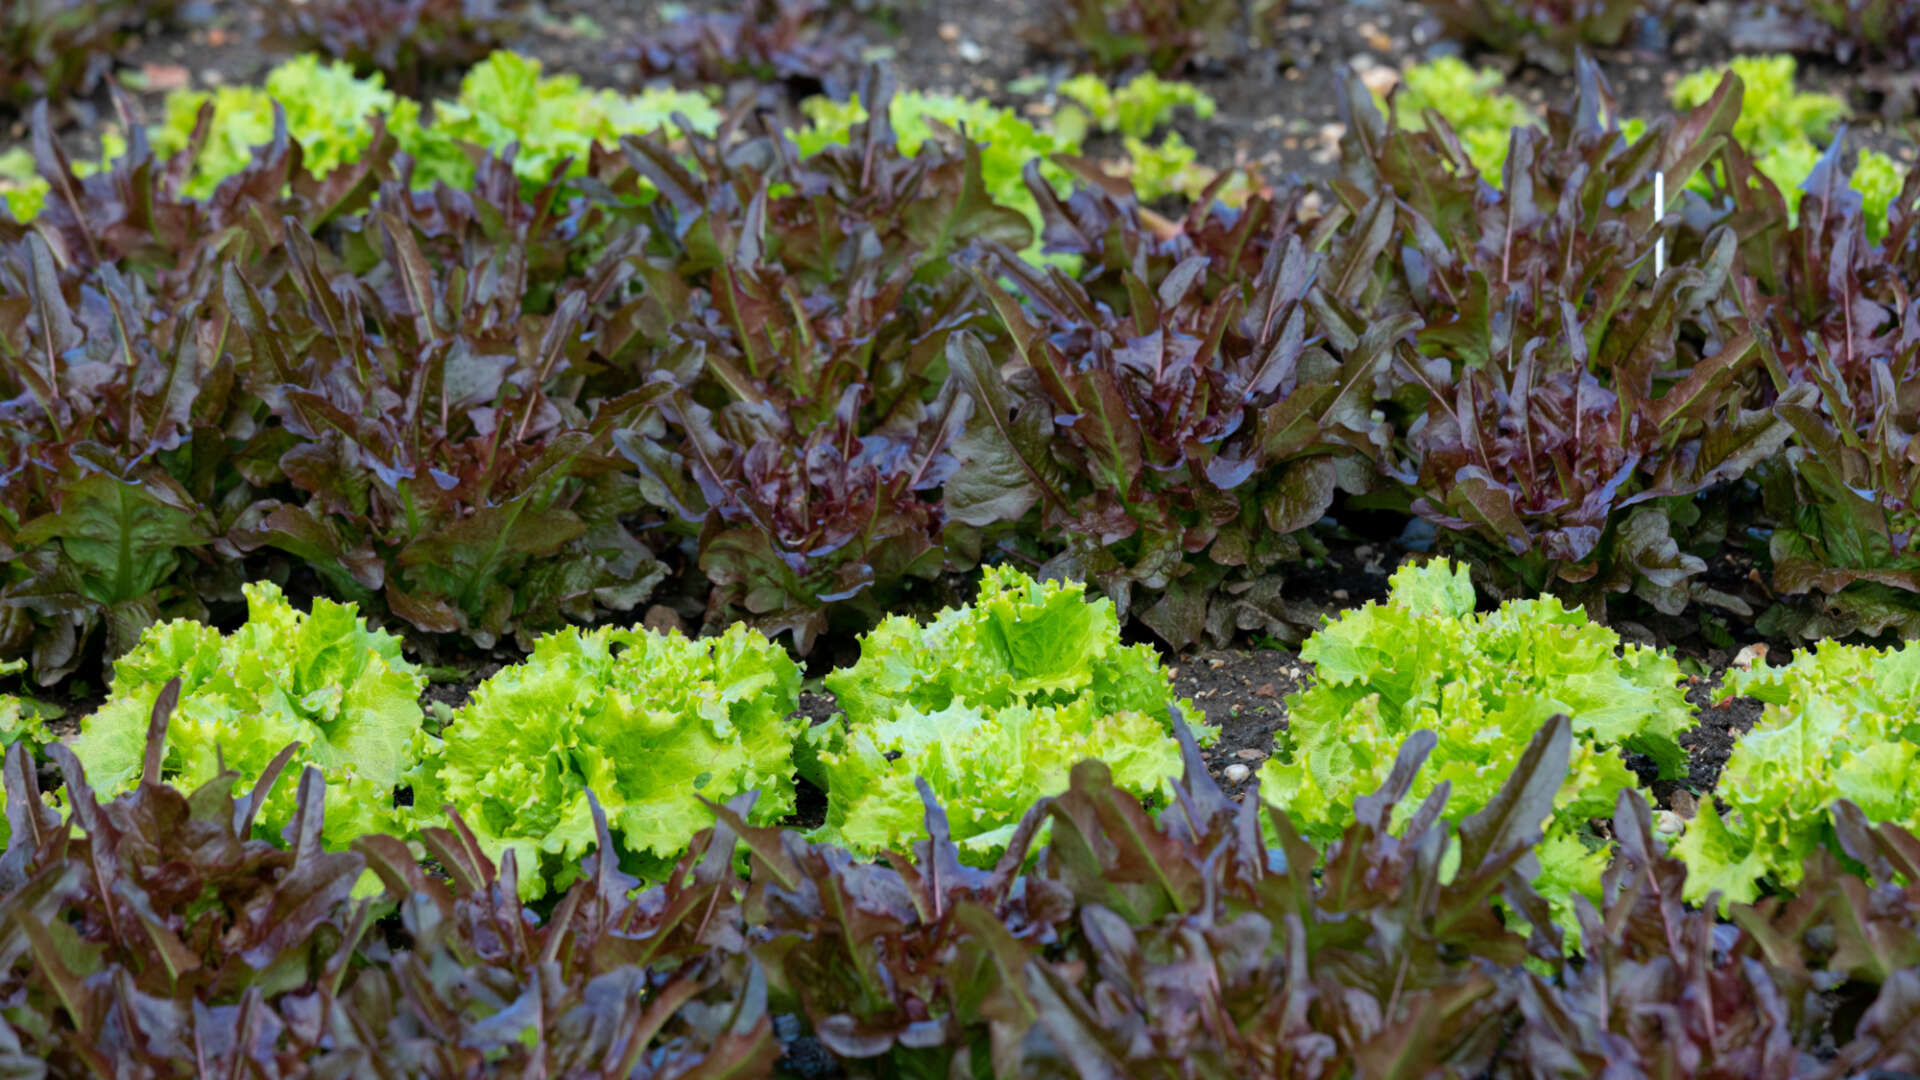 Rows of salad leaves in veg beds